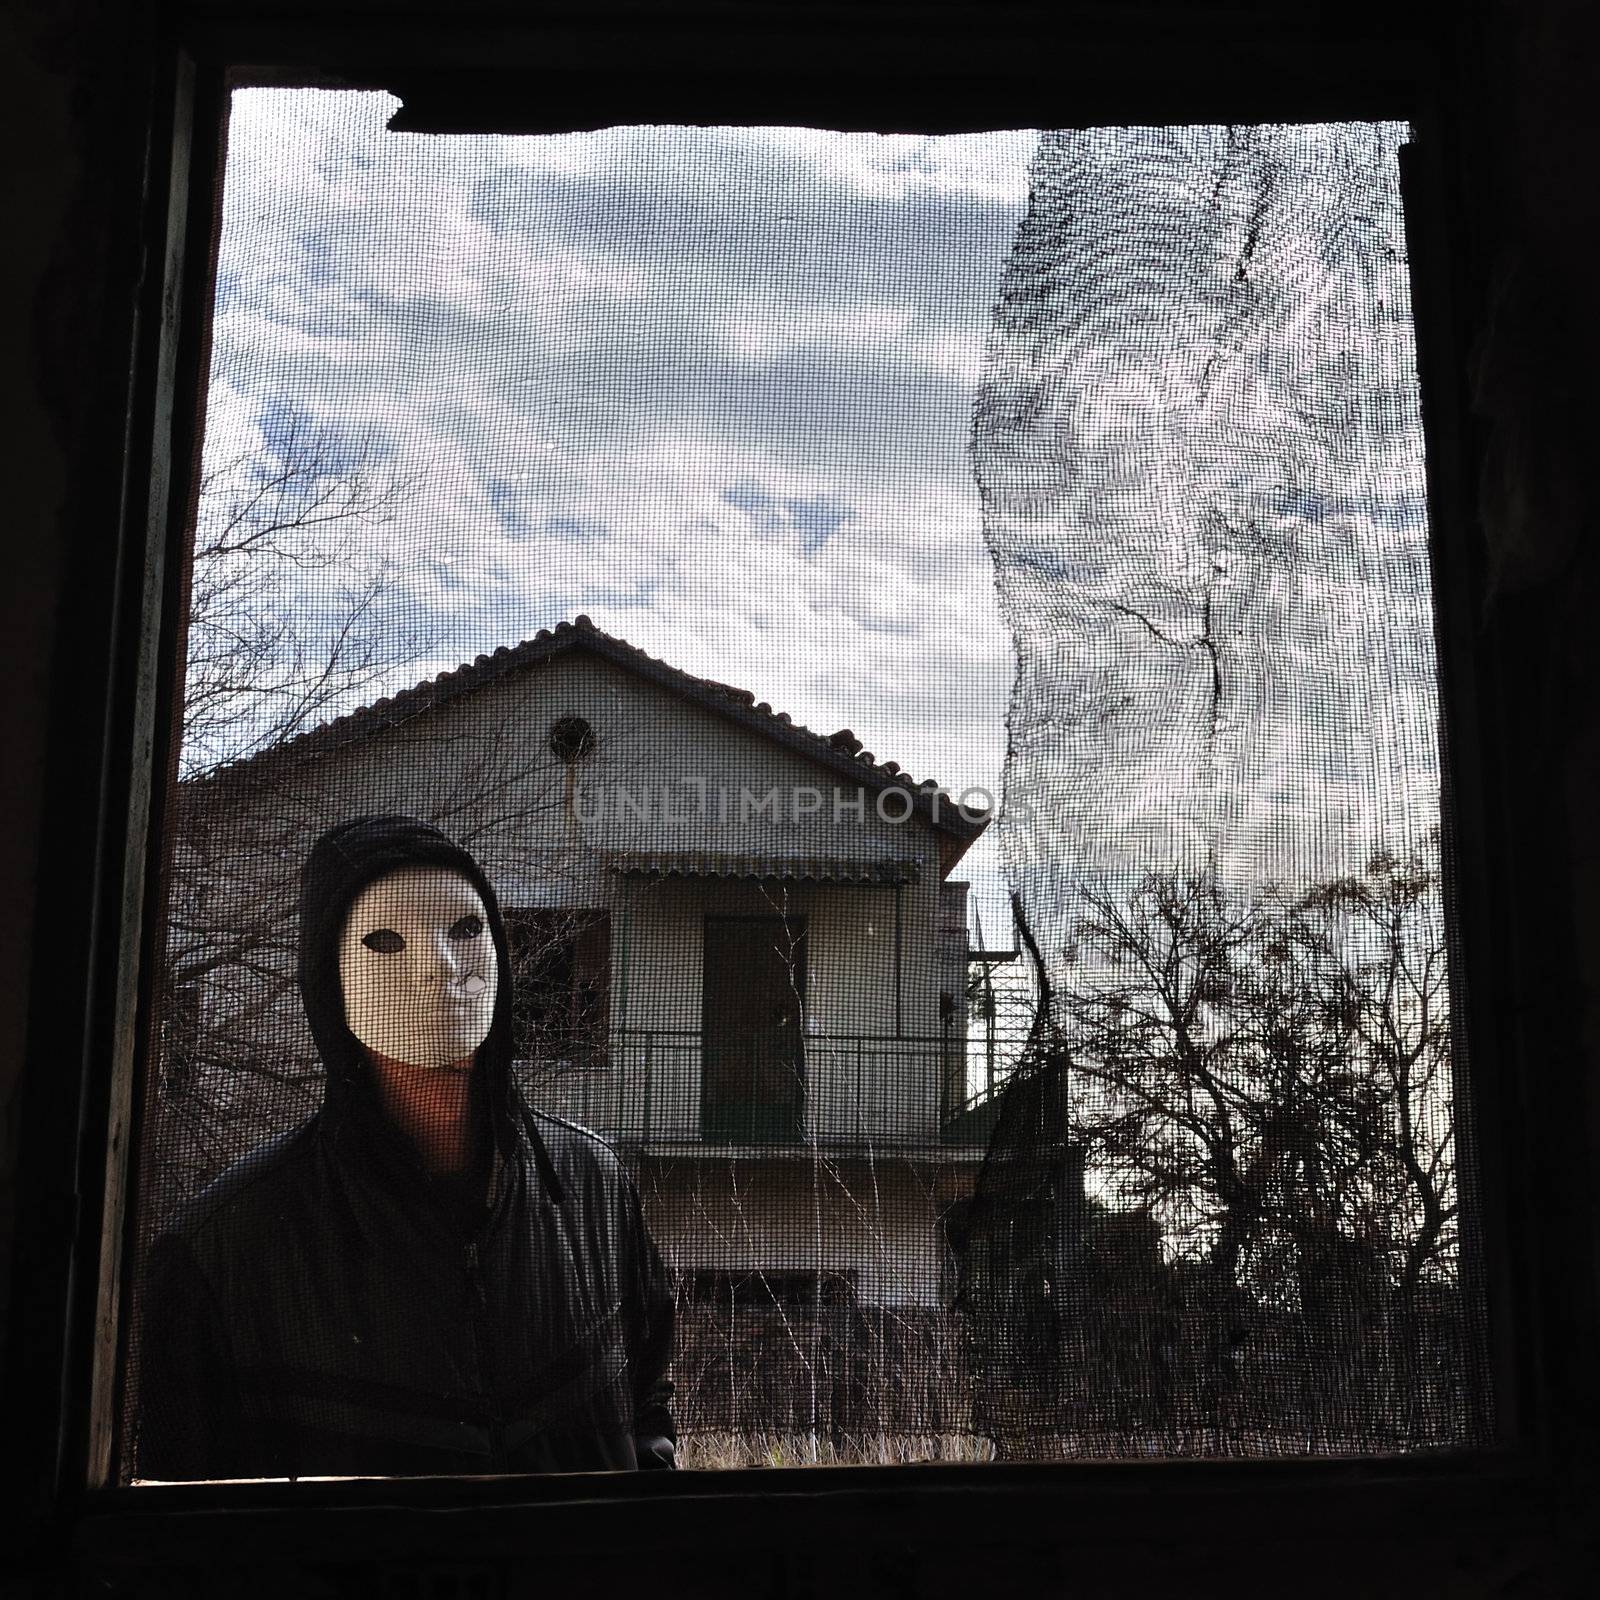 Hooded figure behind threaded window of derelict house. Masked maniac looking at you the viewer!